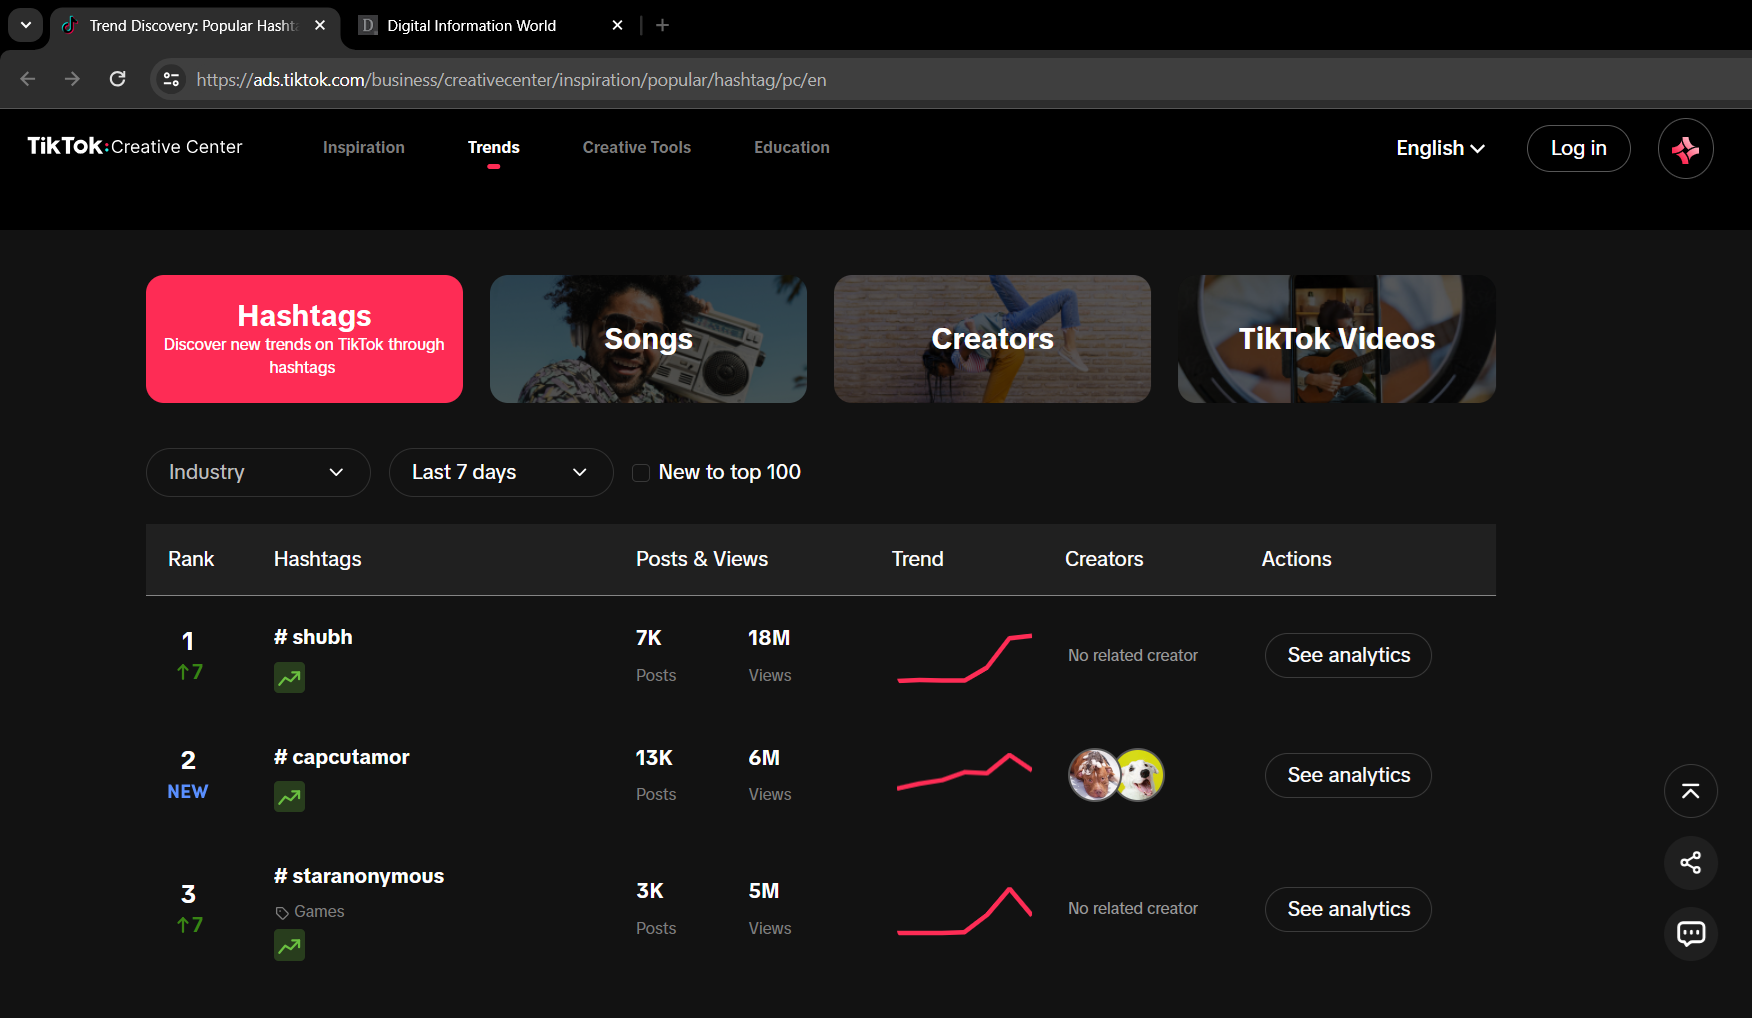 New TikTok Creative Center page for hashtags without search feature